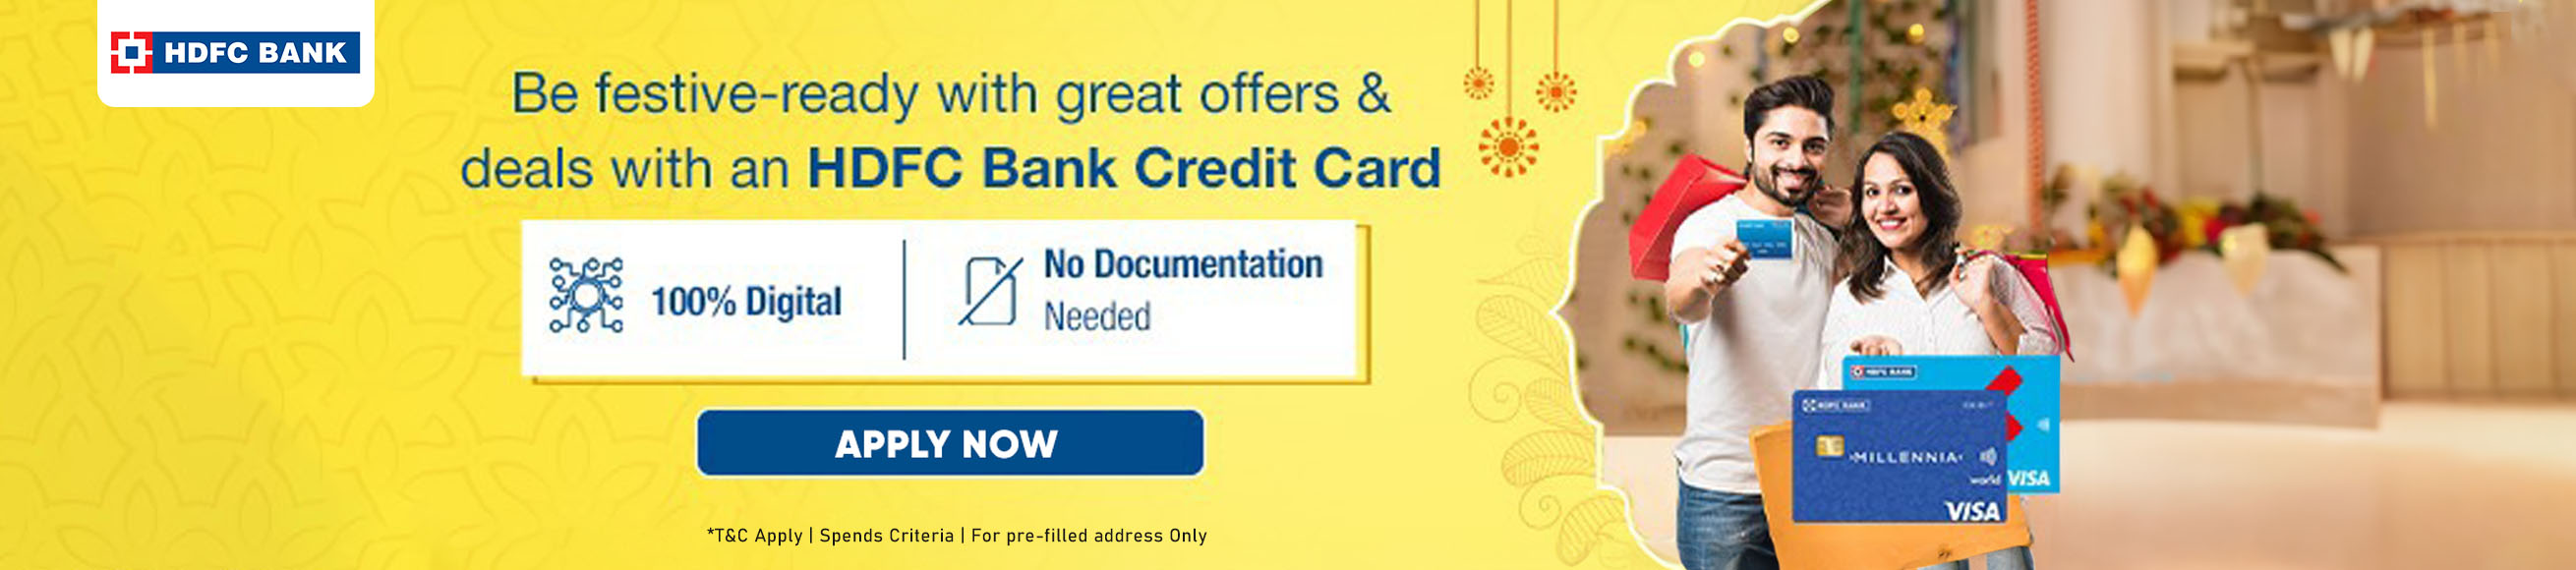 HDFC Bank Best Credit Cards